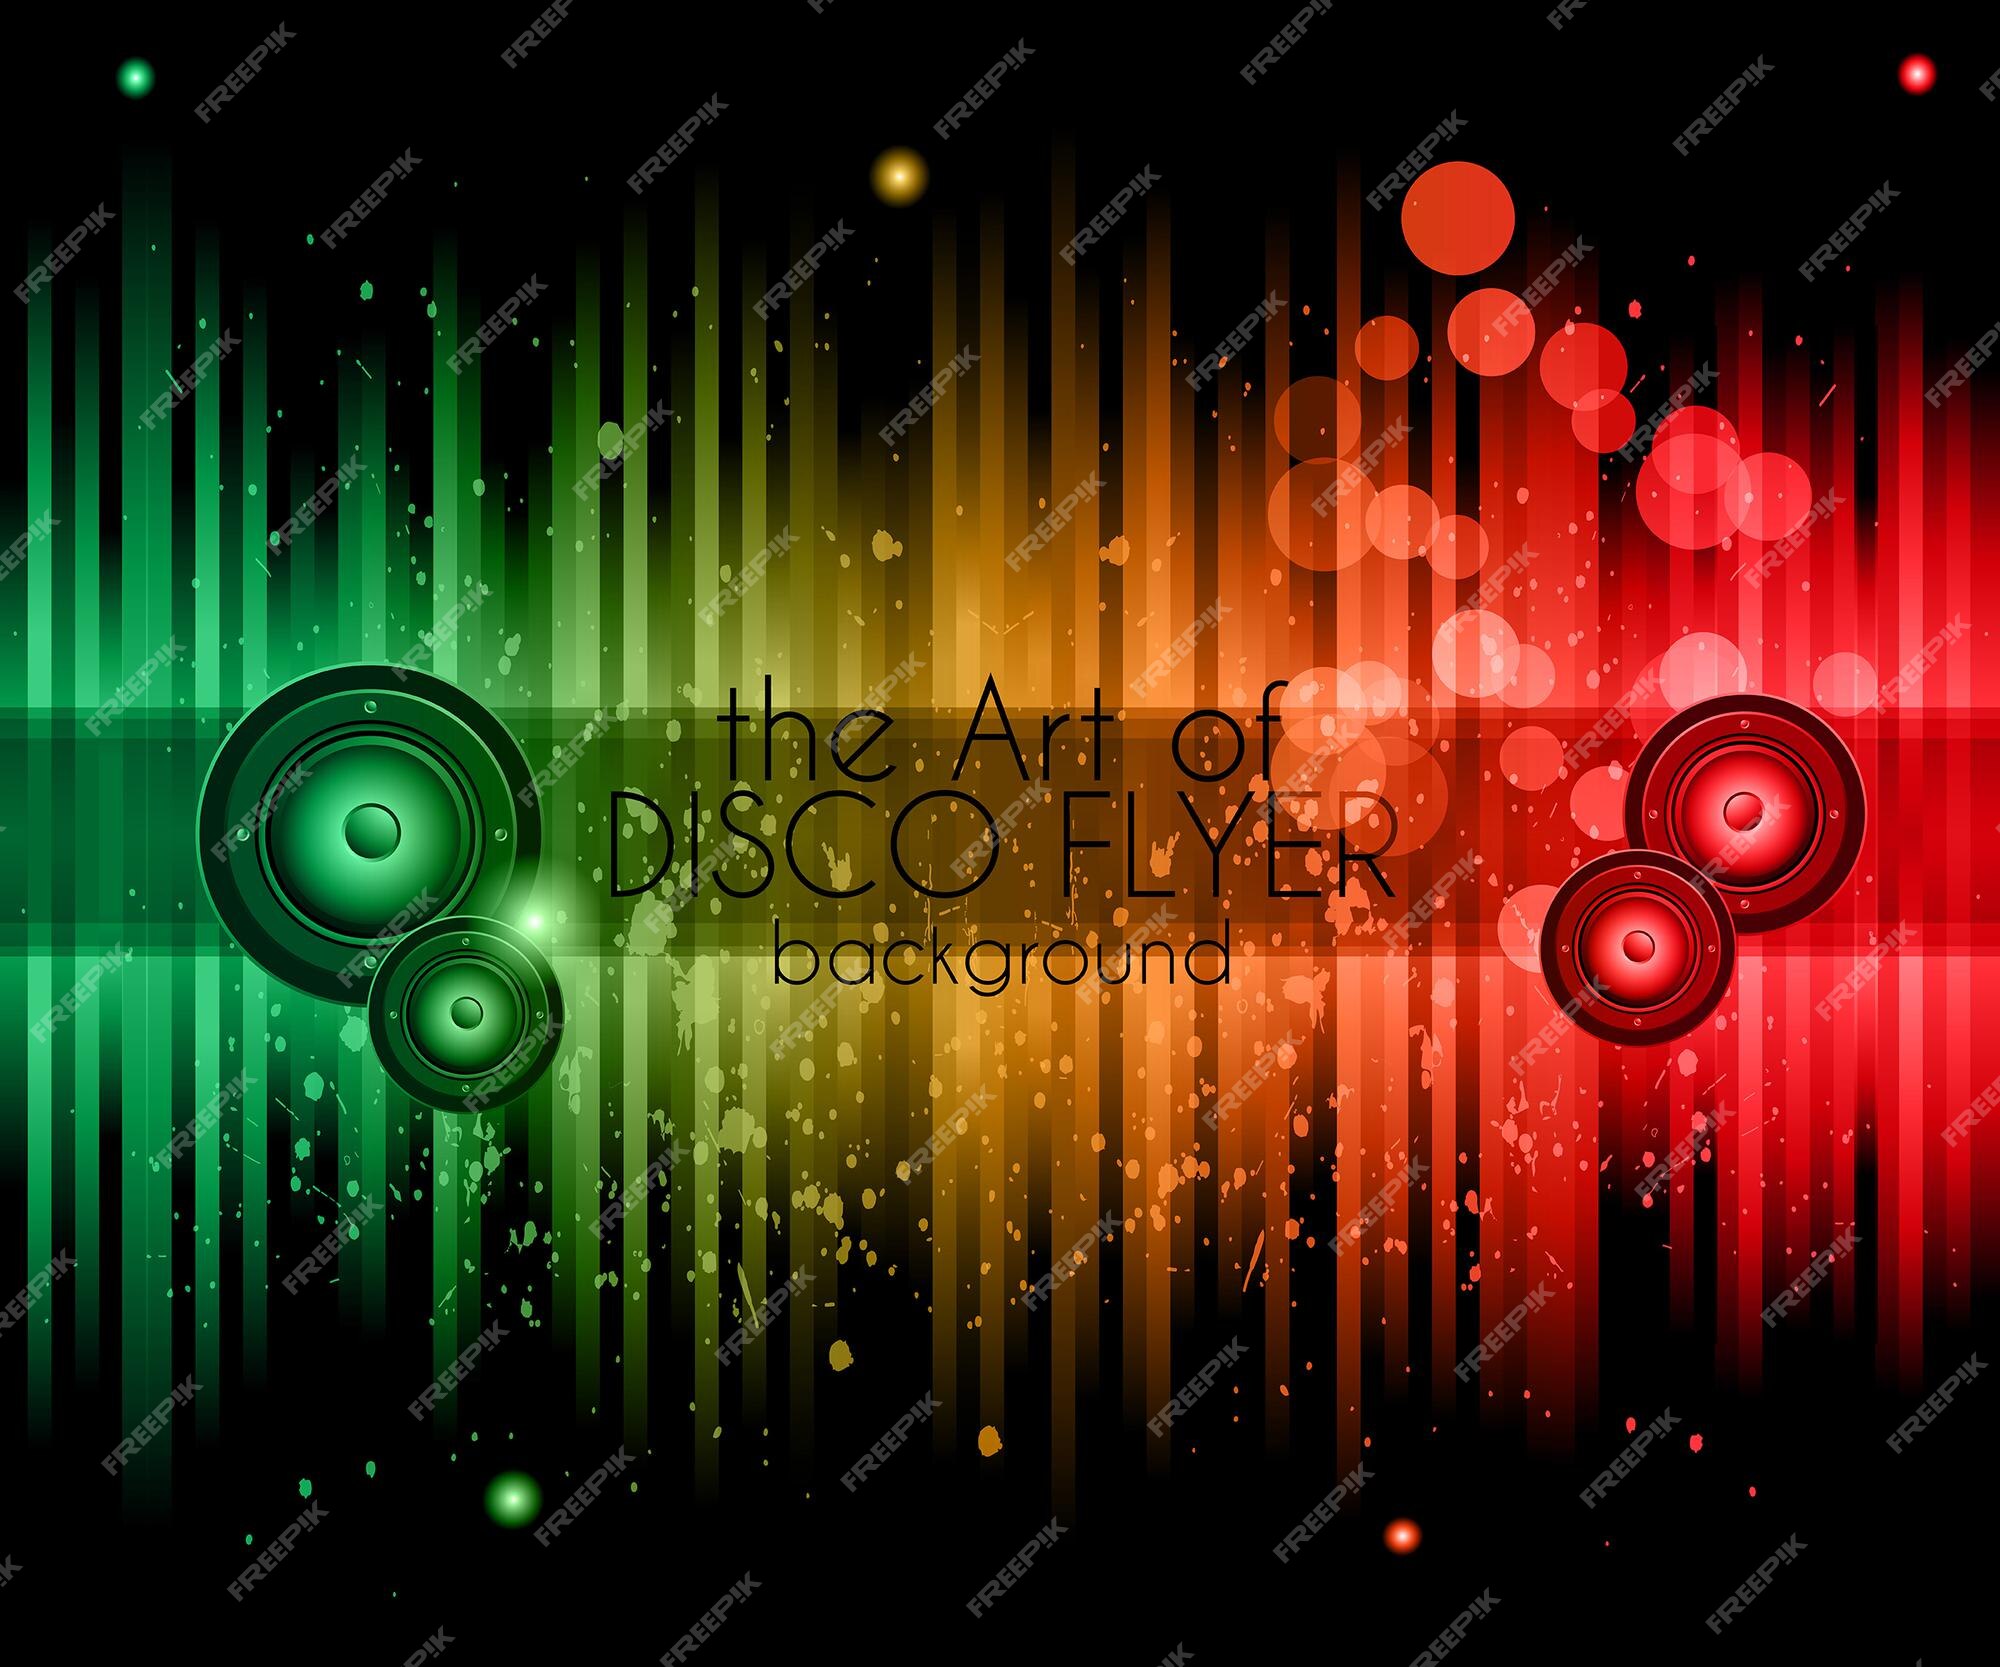 Premium Vector | Disco club banner background for music nights event